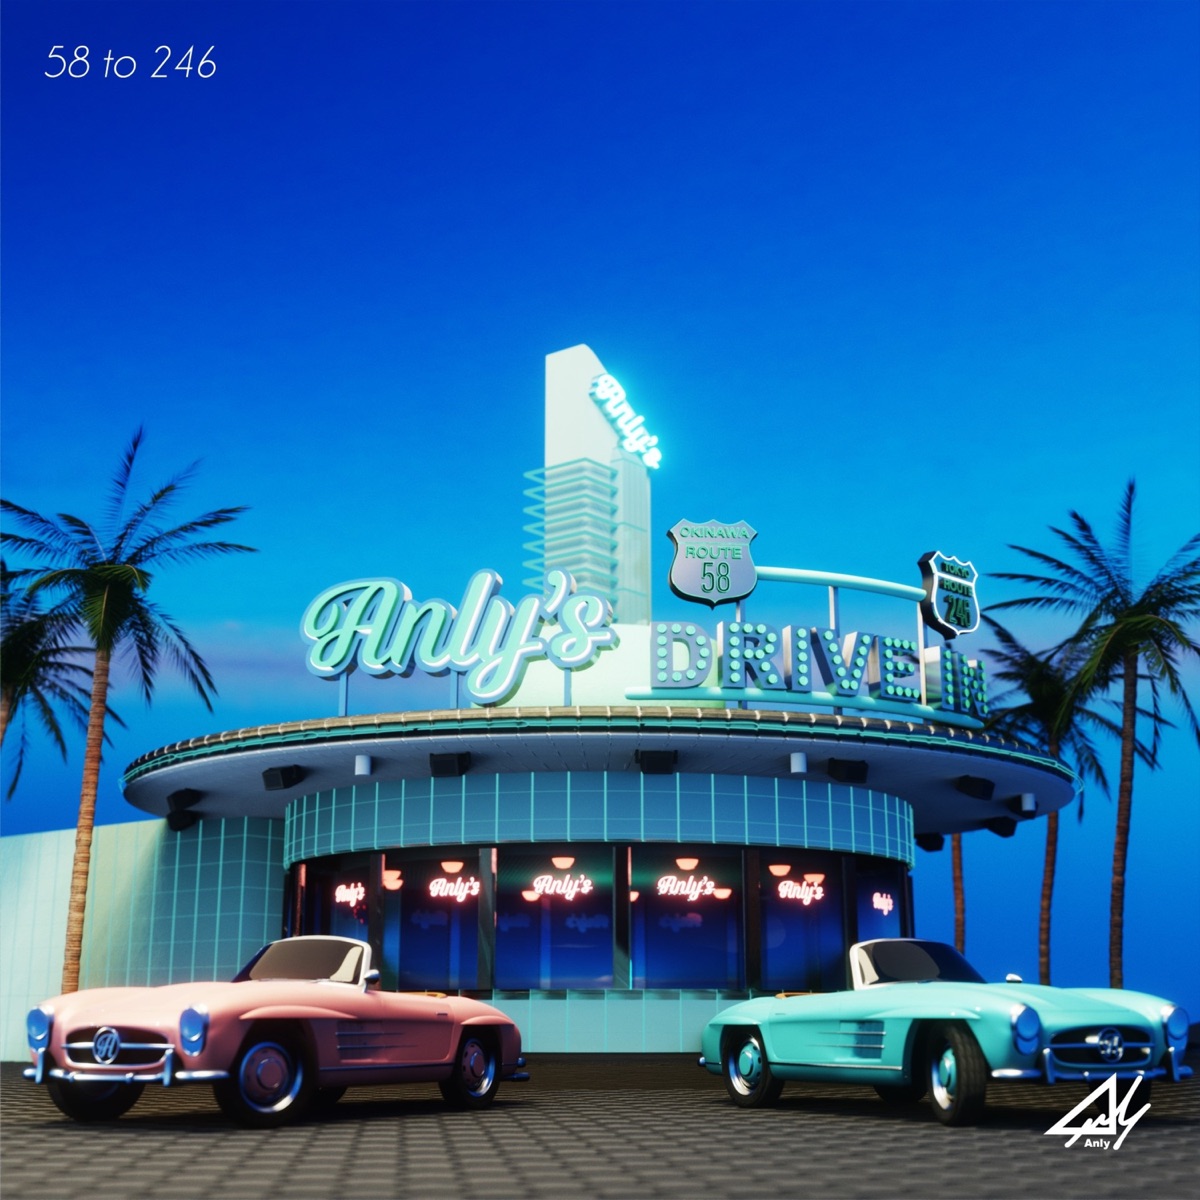 『Anly - 58 to 246』収録の『58 to 246』ジャケット